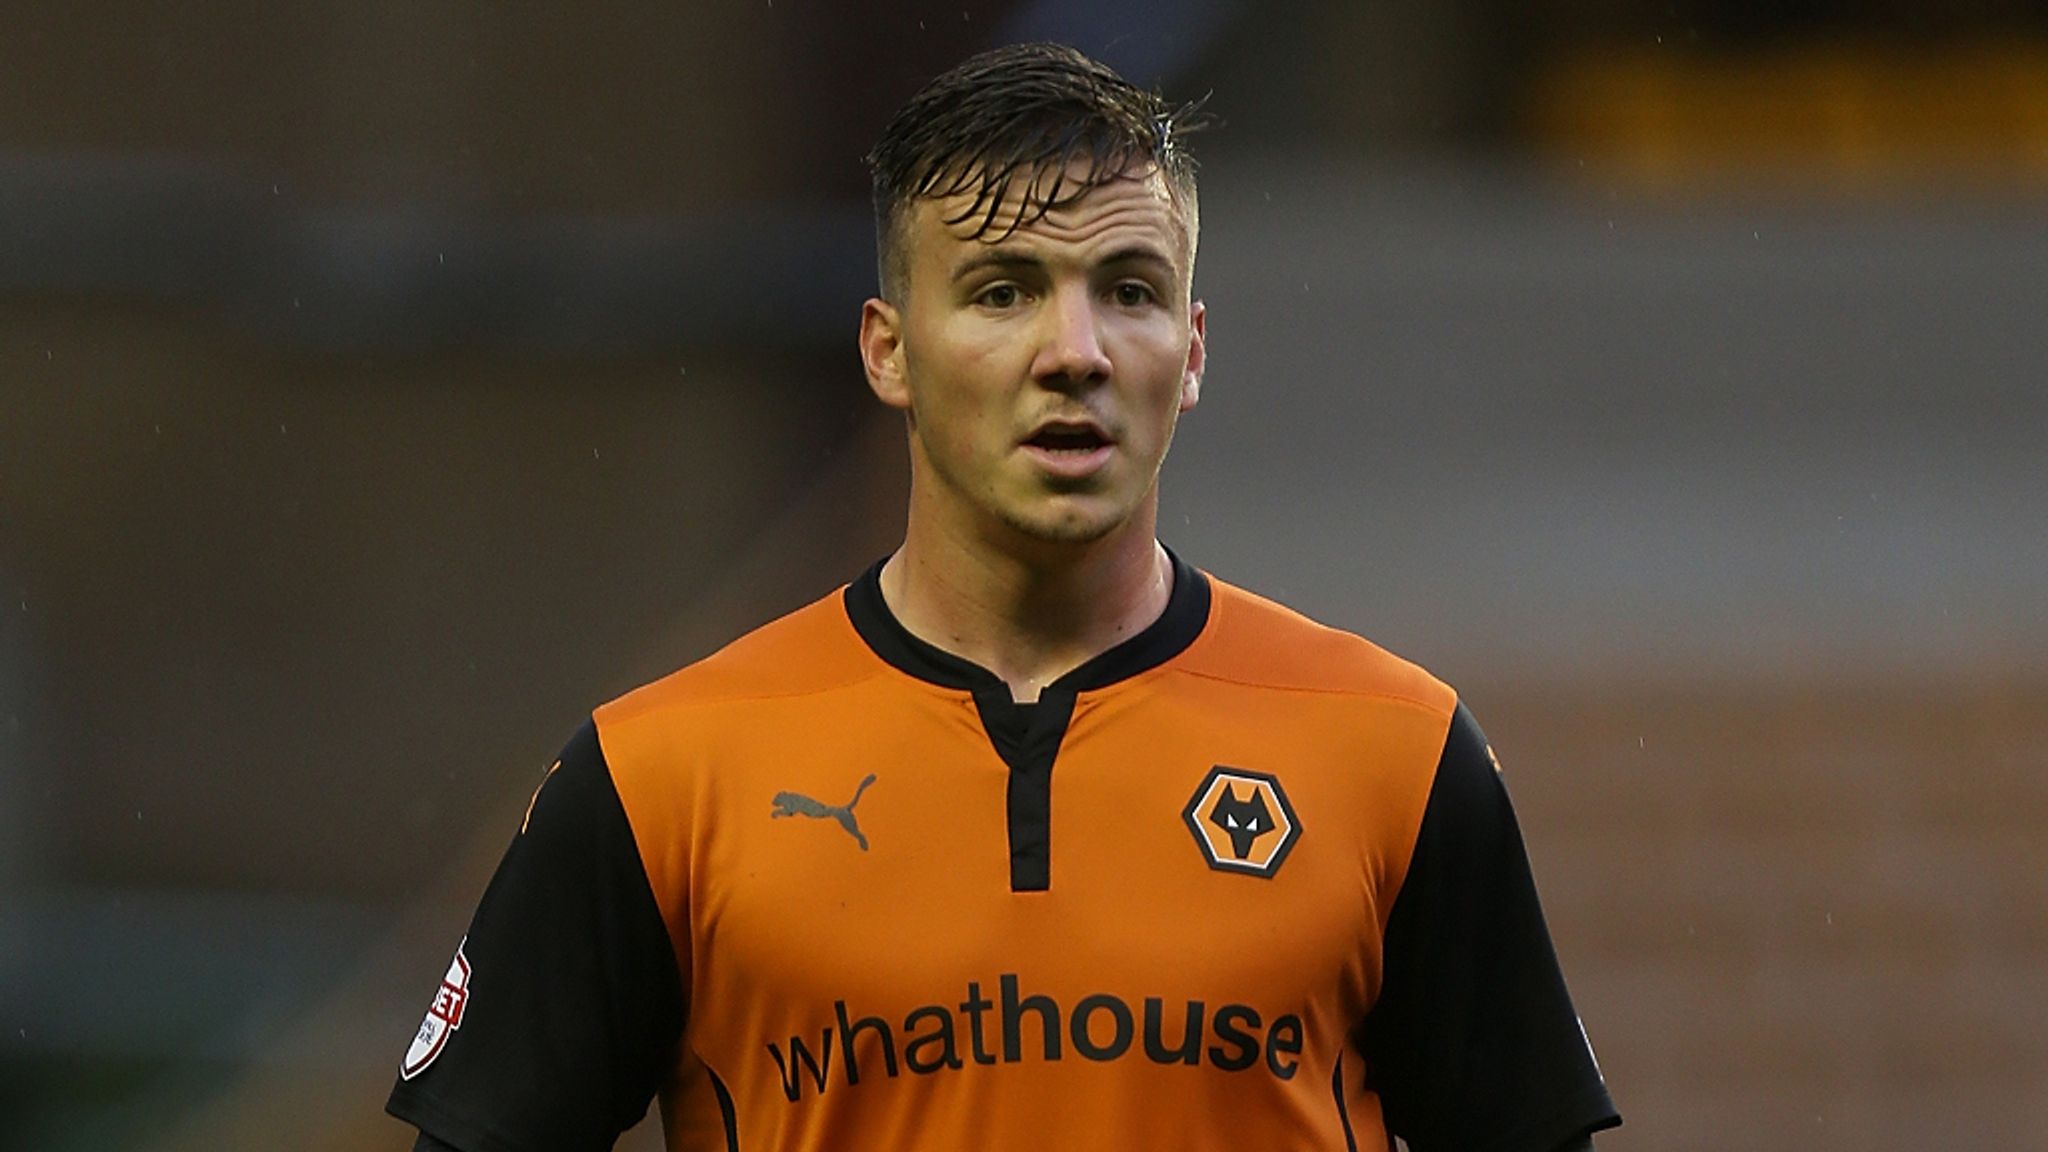 Sheffield United sign Lee Evans from Wolves | Football News | Sky Sports